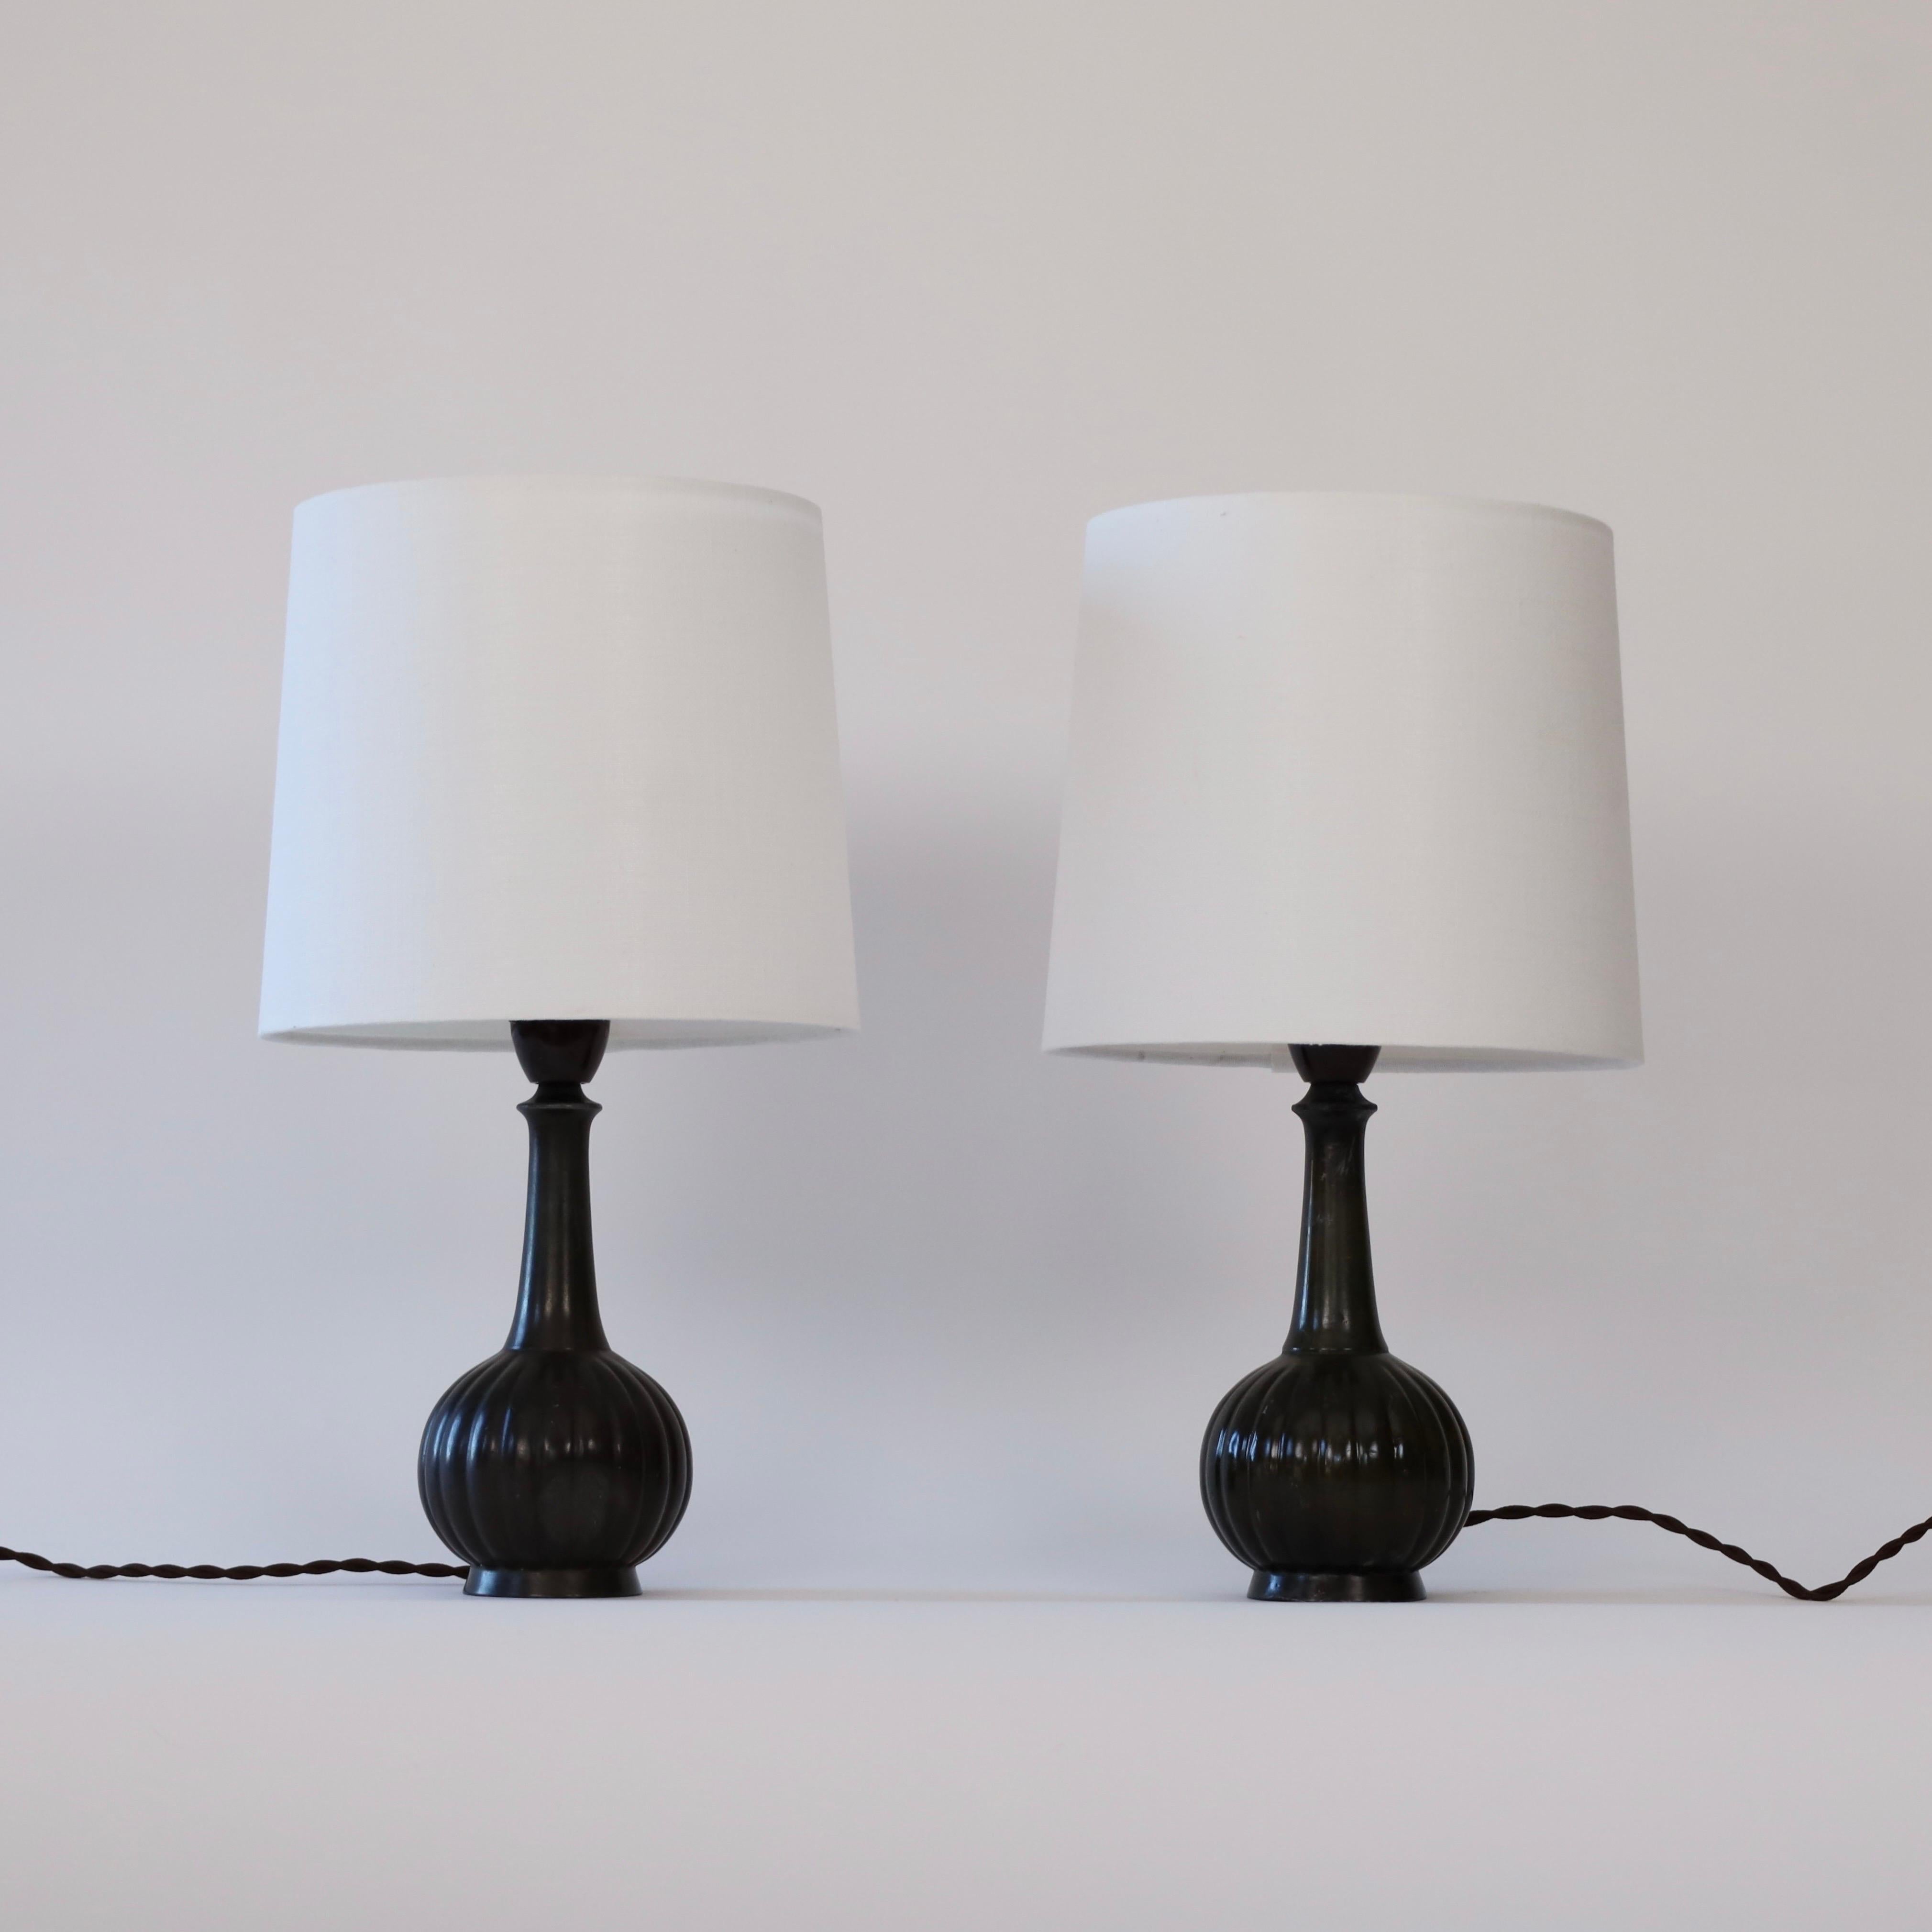 Set of 1920s Just Andersen desk lamps. A historic duo with marks from a 100 years life-time.
 
* A set (2) of metal desk lamp with a round base with vertical lines and white shades.
* Designer: Just Andersen
* Model: D140 (stamped ‘Just D140’)
*